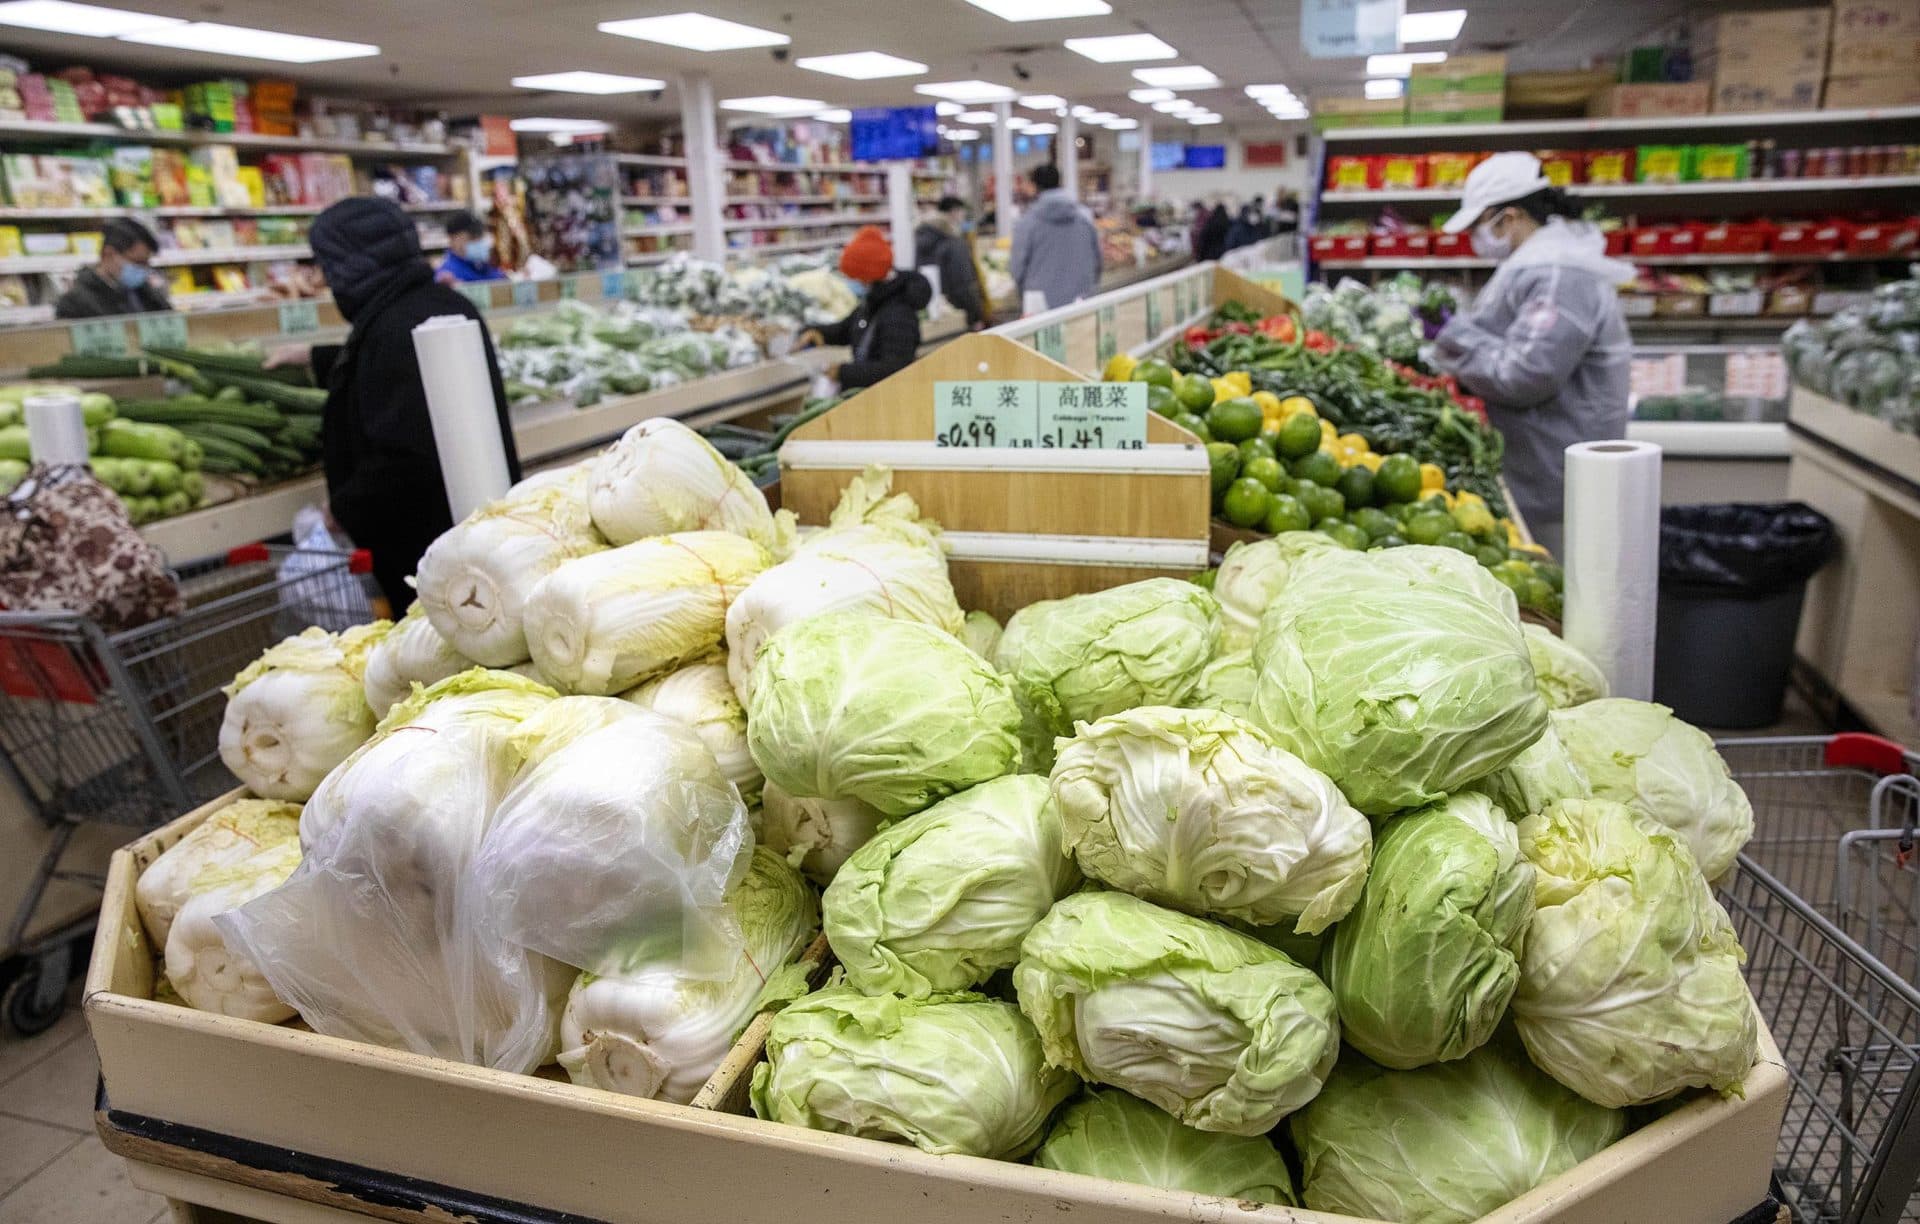 Cabbages on sale in the produce section at the Jia Ho Super Market in Boston. (Robin Lubbock/WBUR)